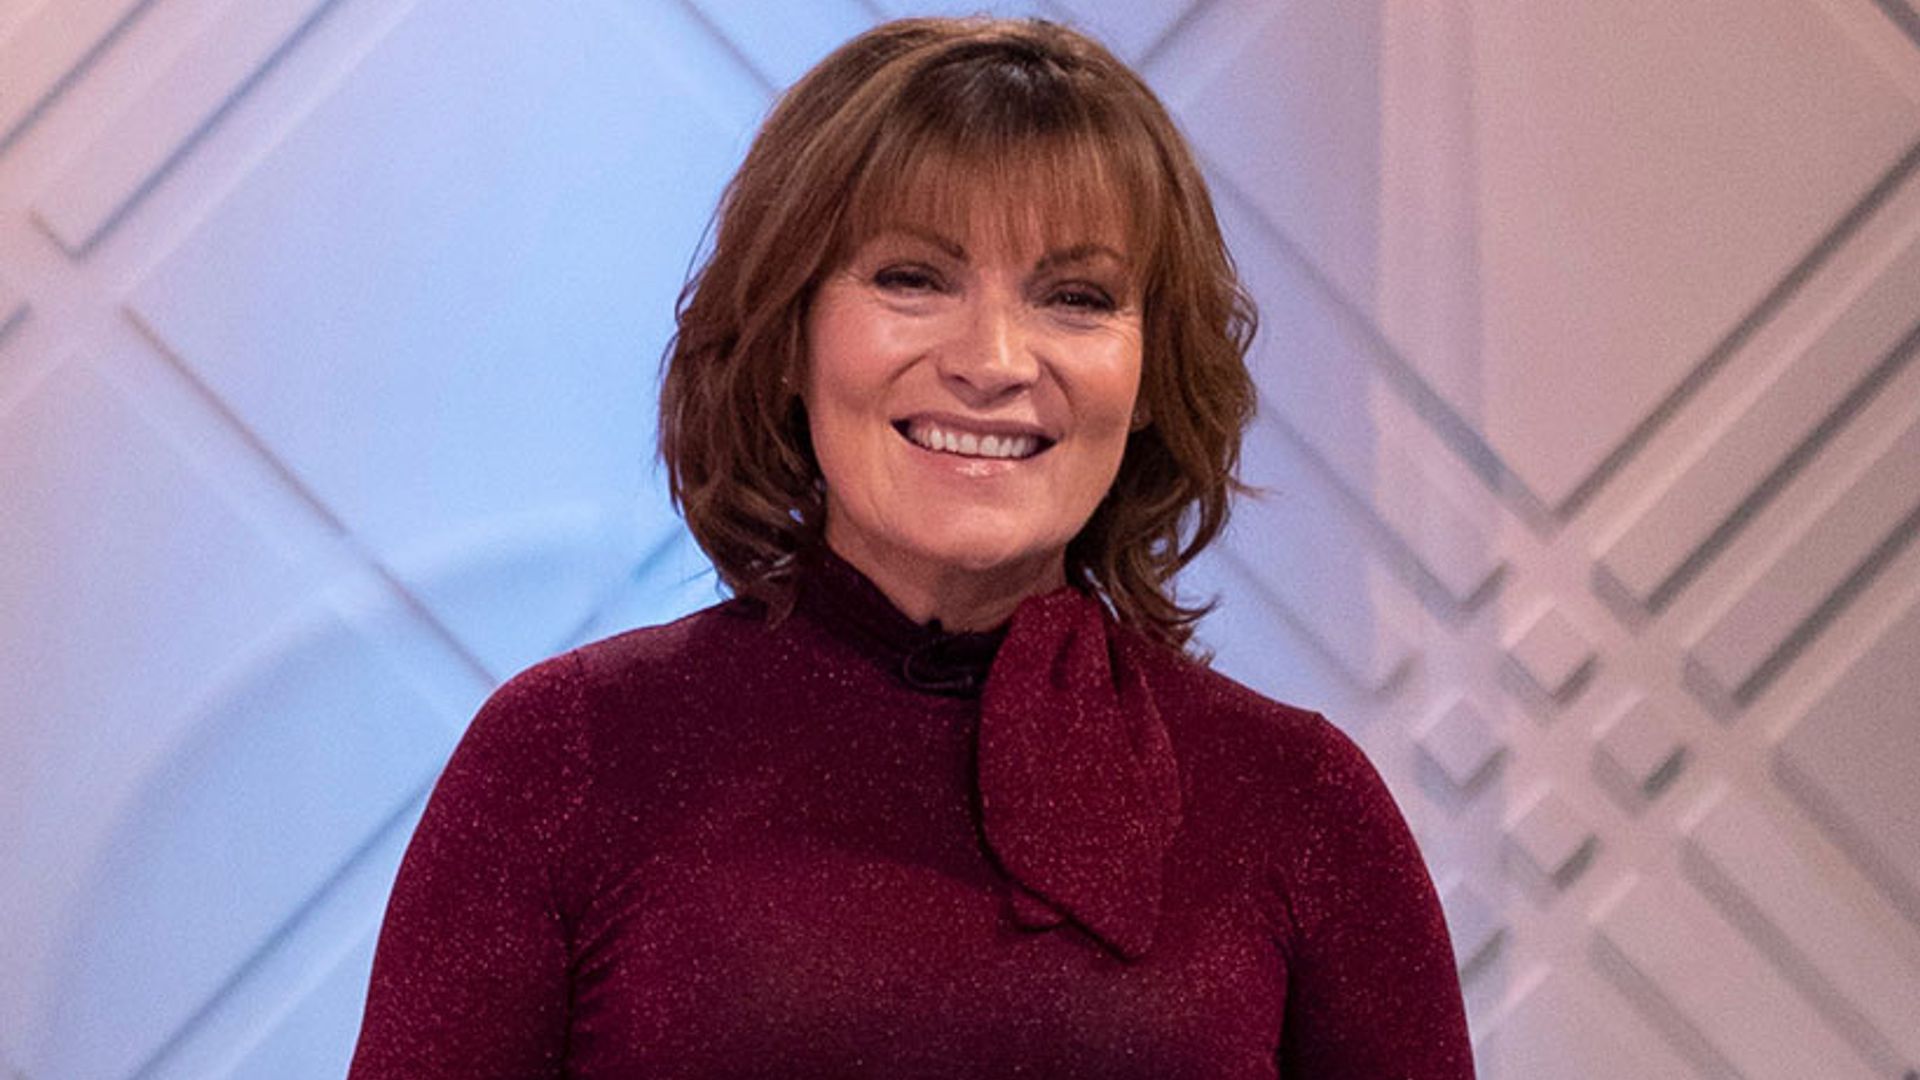 Lorraine Kelly's bright blue shirt dress is exactly what every woman's wardrobe needs